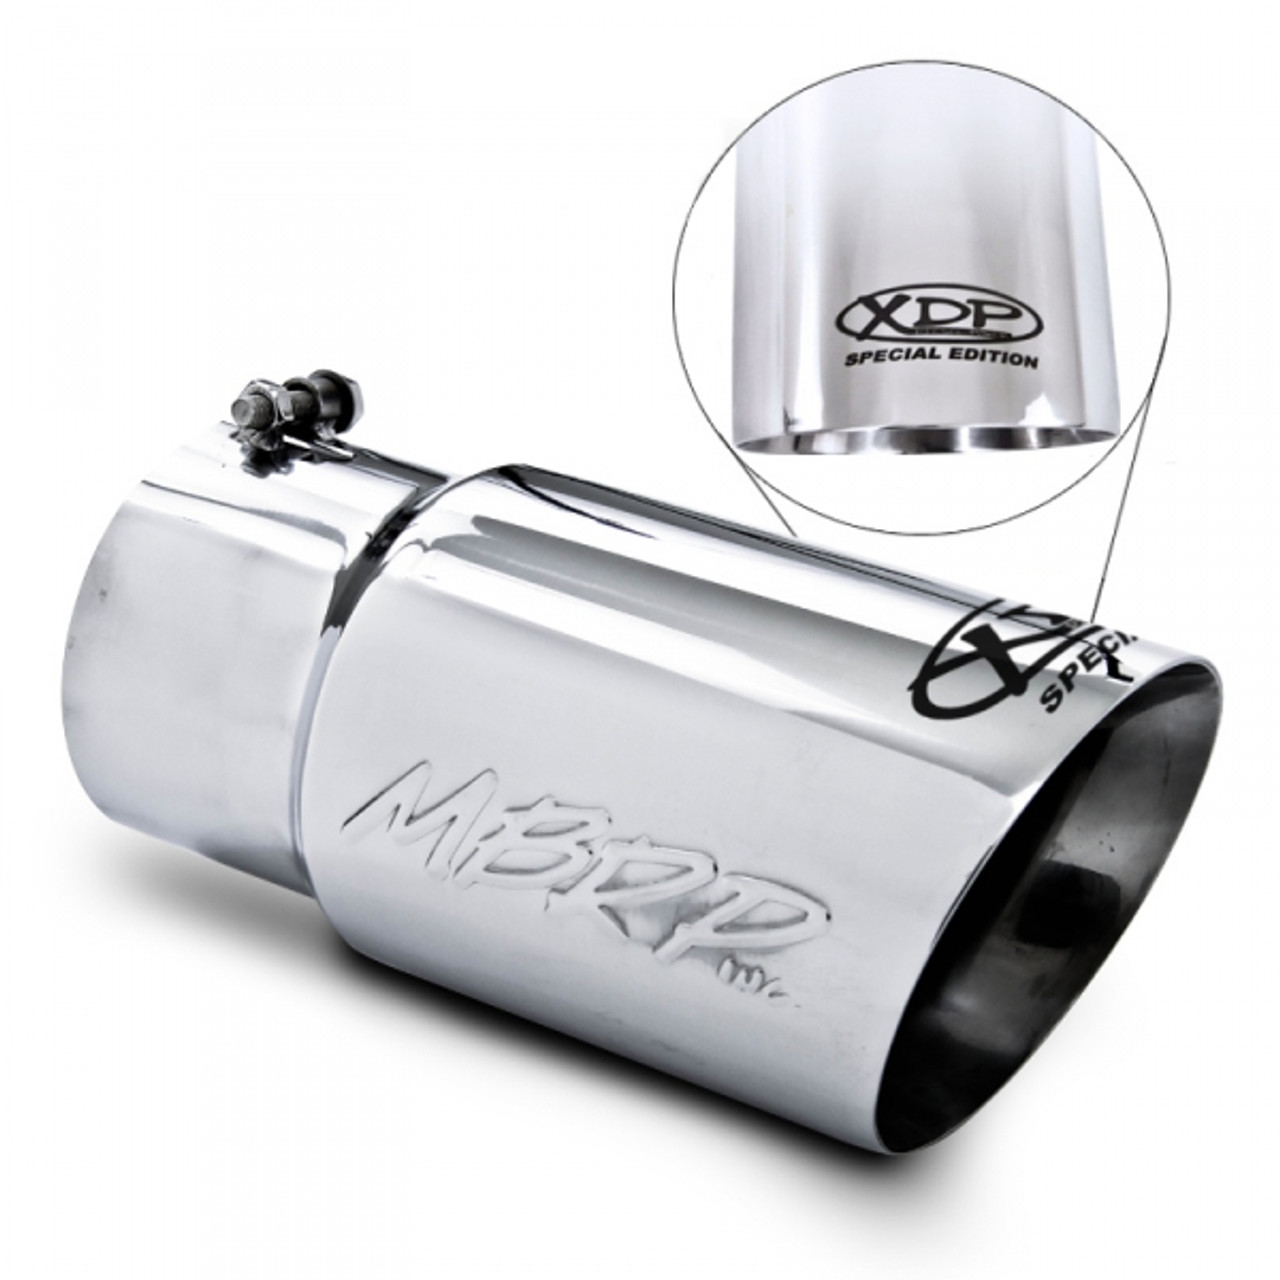 MBRP Angled Exhaust Tip XDP Special Edition